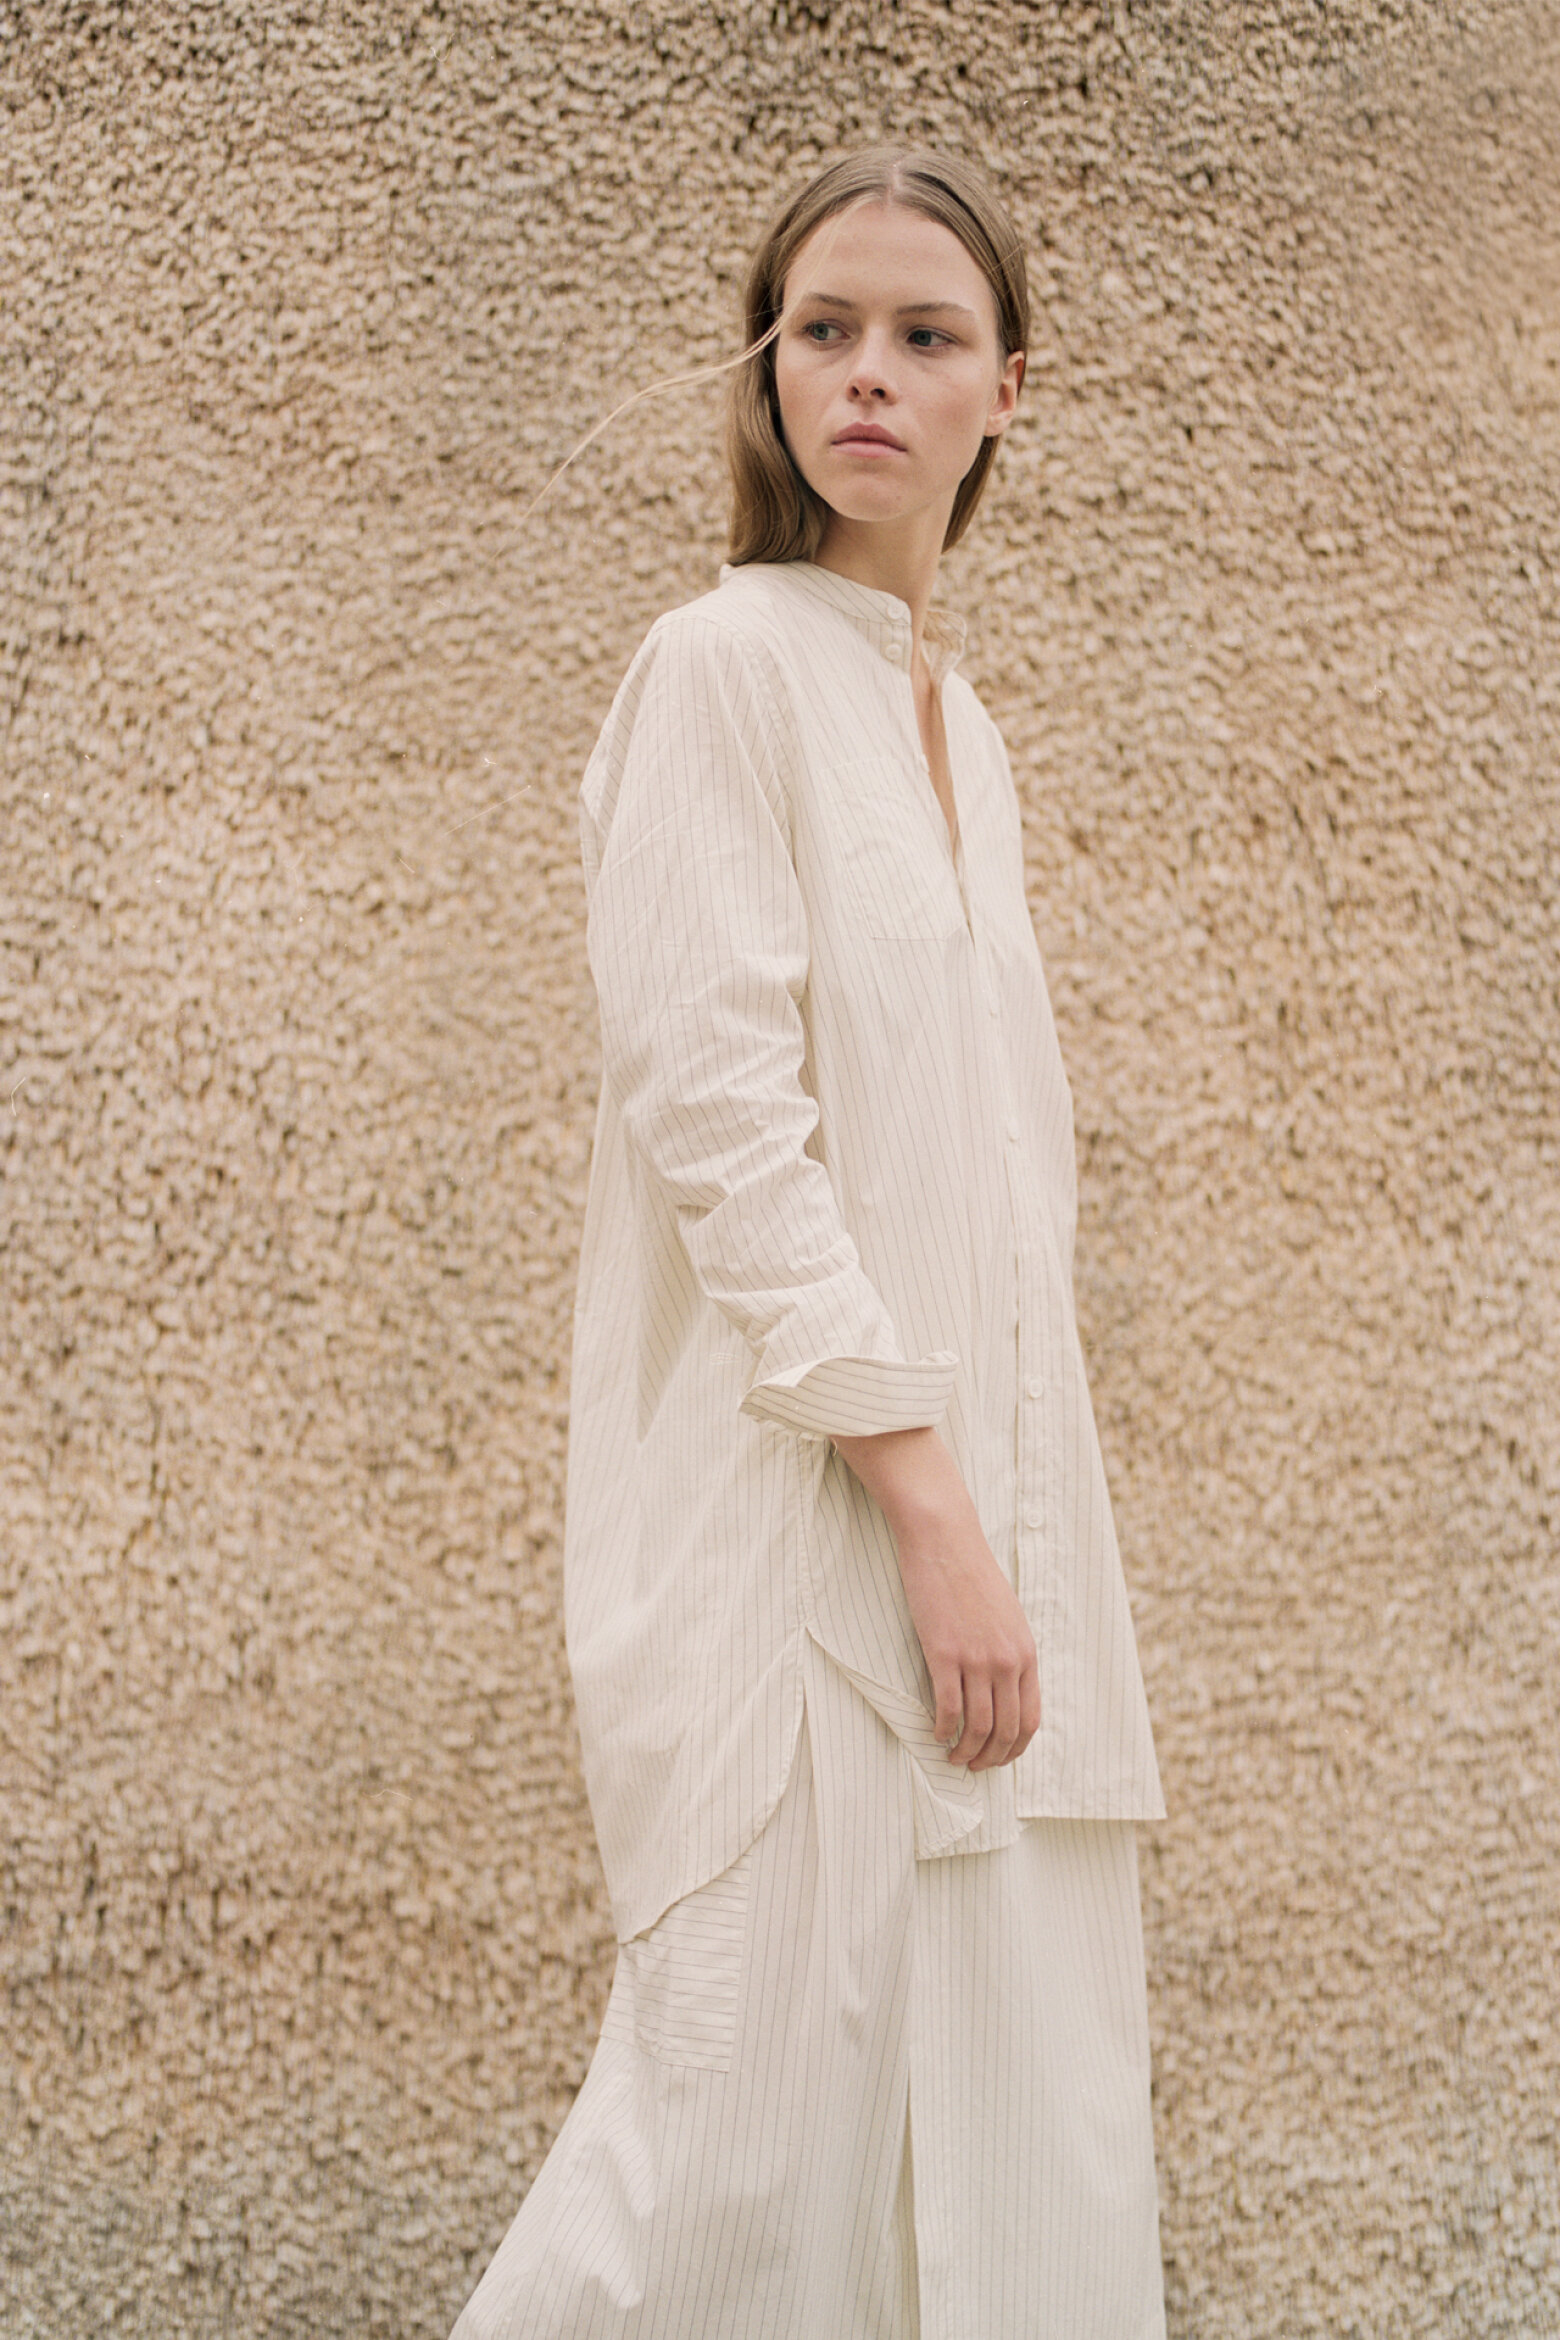 Norse Store | Shipping Worldwide - Norse Projects Women's SS18 Campaign